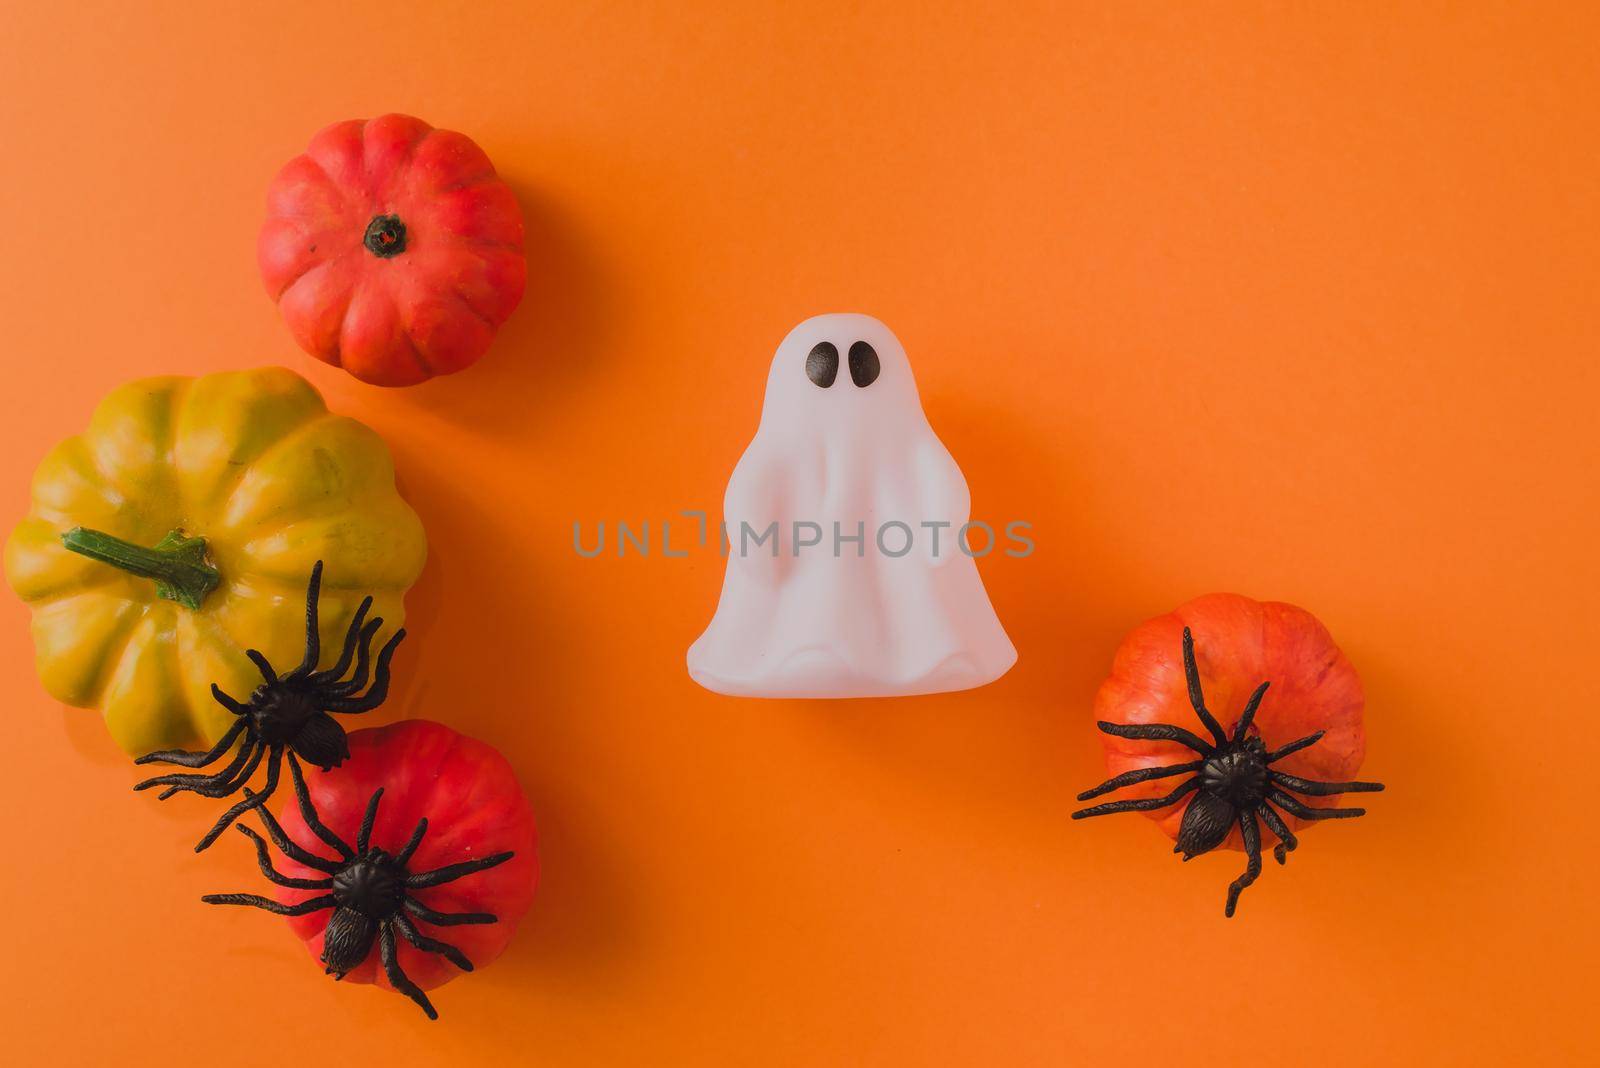 Cute ghost on a background of pumpkins and spiders on an orange background. Place for your text.